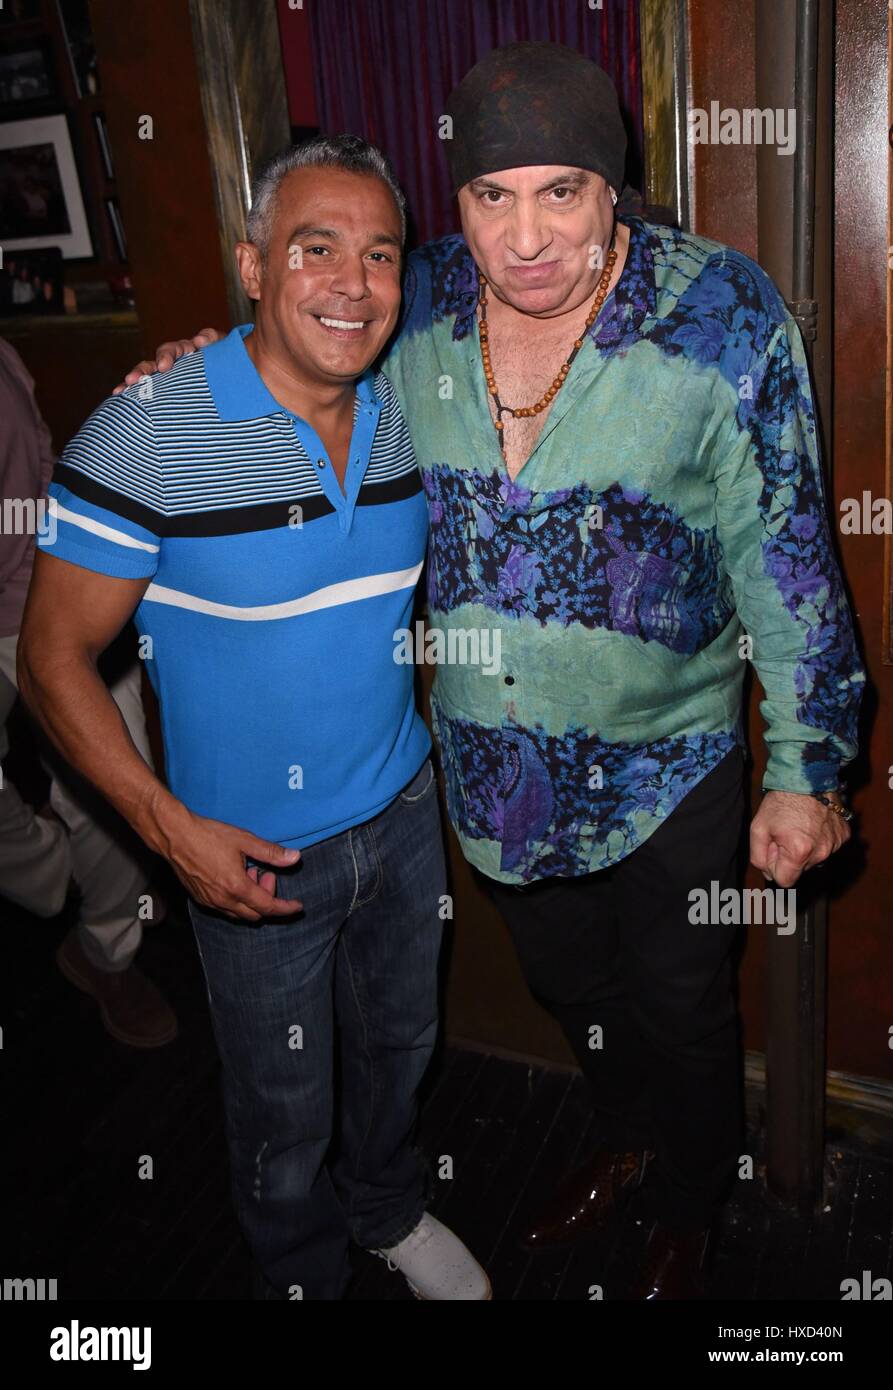 New York, NY, USA. 27th Mar, 2017. Jay Fagen, Little Steven Van Zandt at arrivals for Micky Dolenz Private Party, The Cutting Room, New York, NY March 27, 2017. Credit: Derek Storm/Everett Collection/Alamy Live News Stock Photo